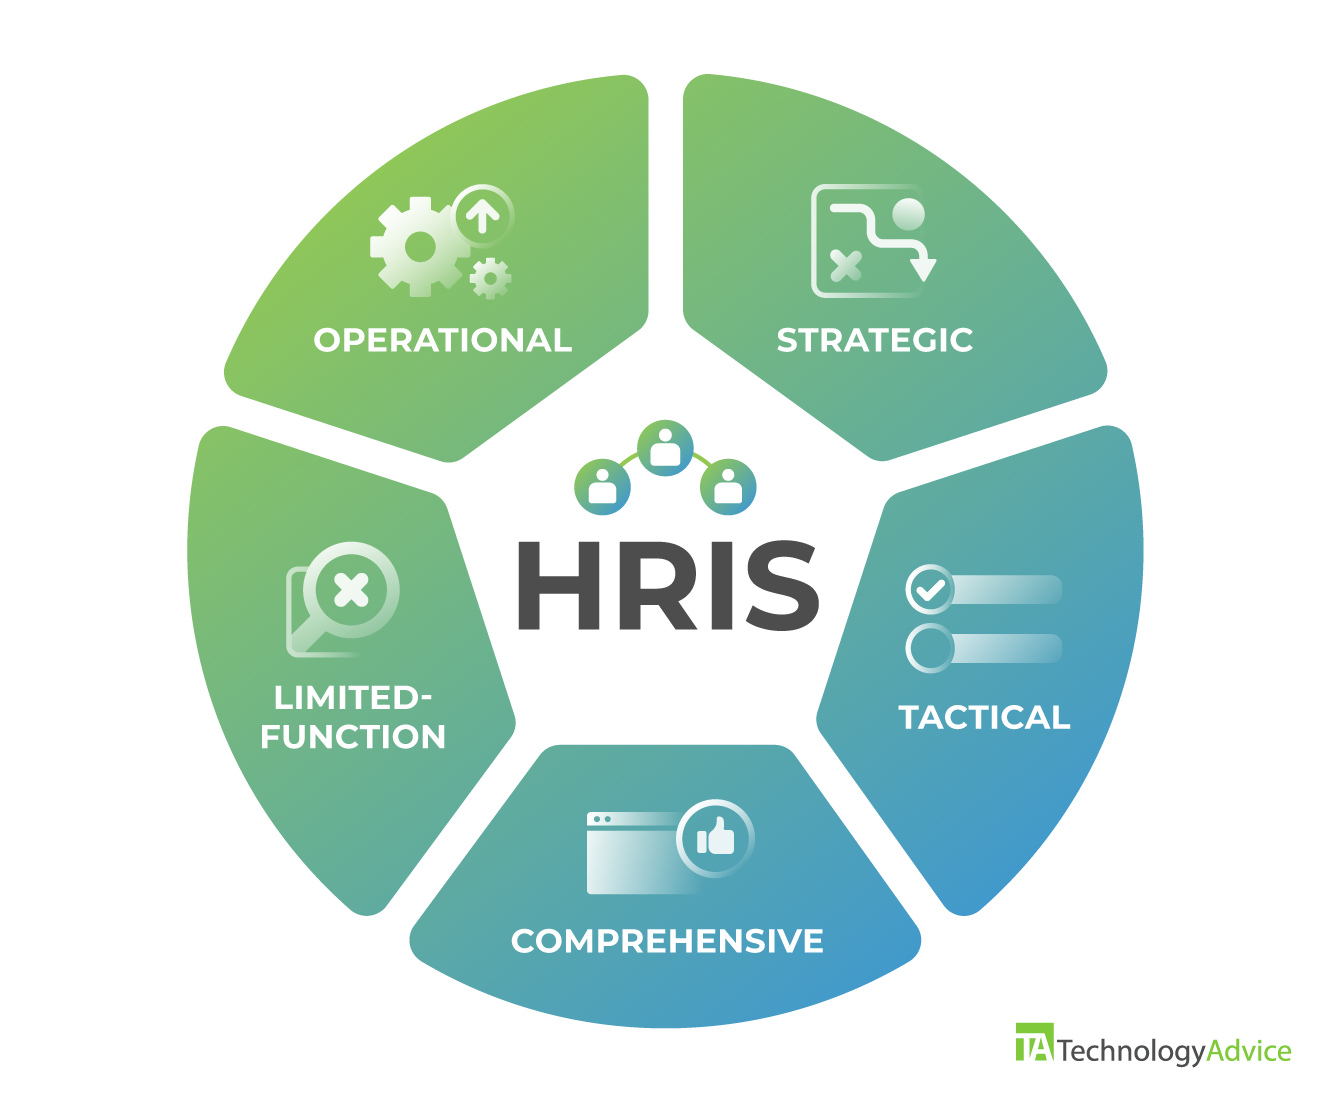 Types of Human Resource Information Systems (HRIS)